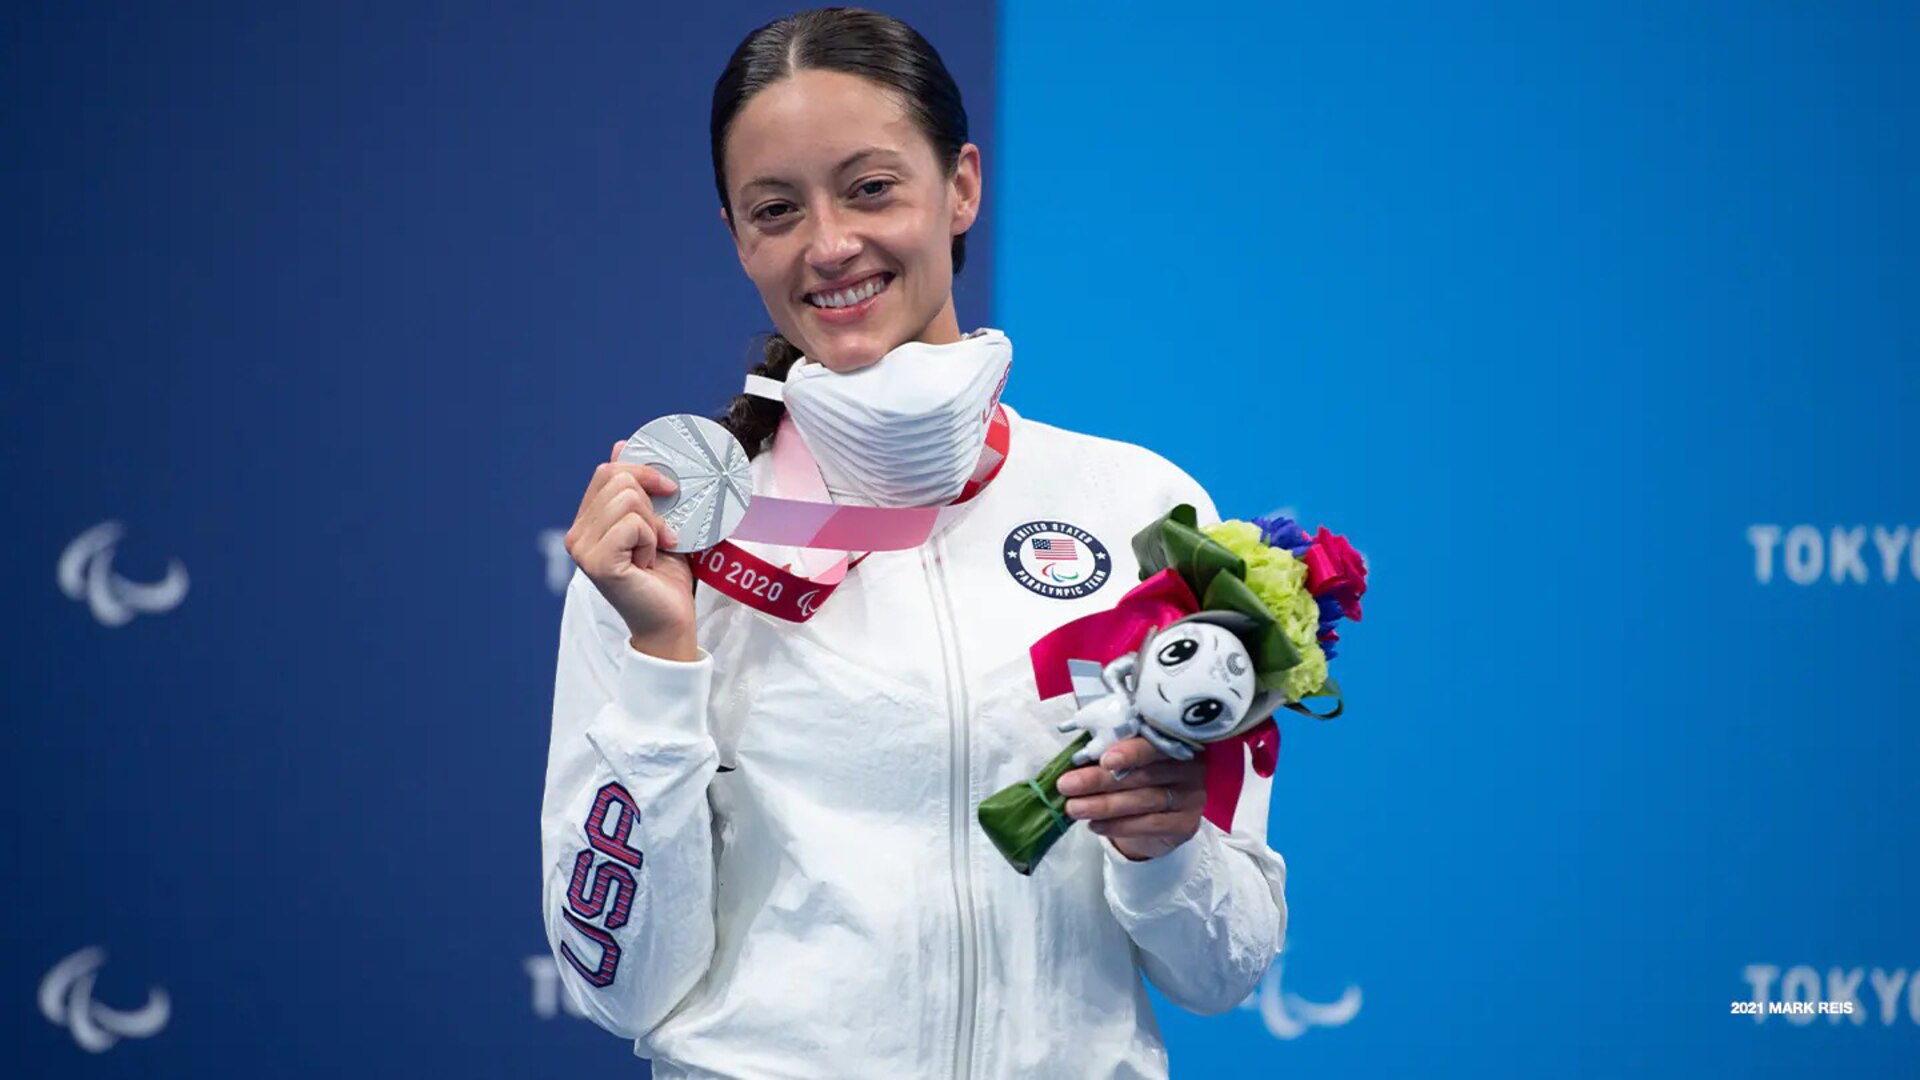 Elizabeth Marks poses with her silver medal at the Paralympic Games Tokyo 2020 on Aug. 25, 2021 in Tokyo.